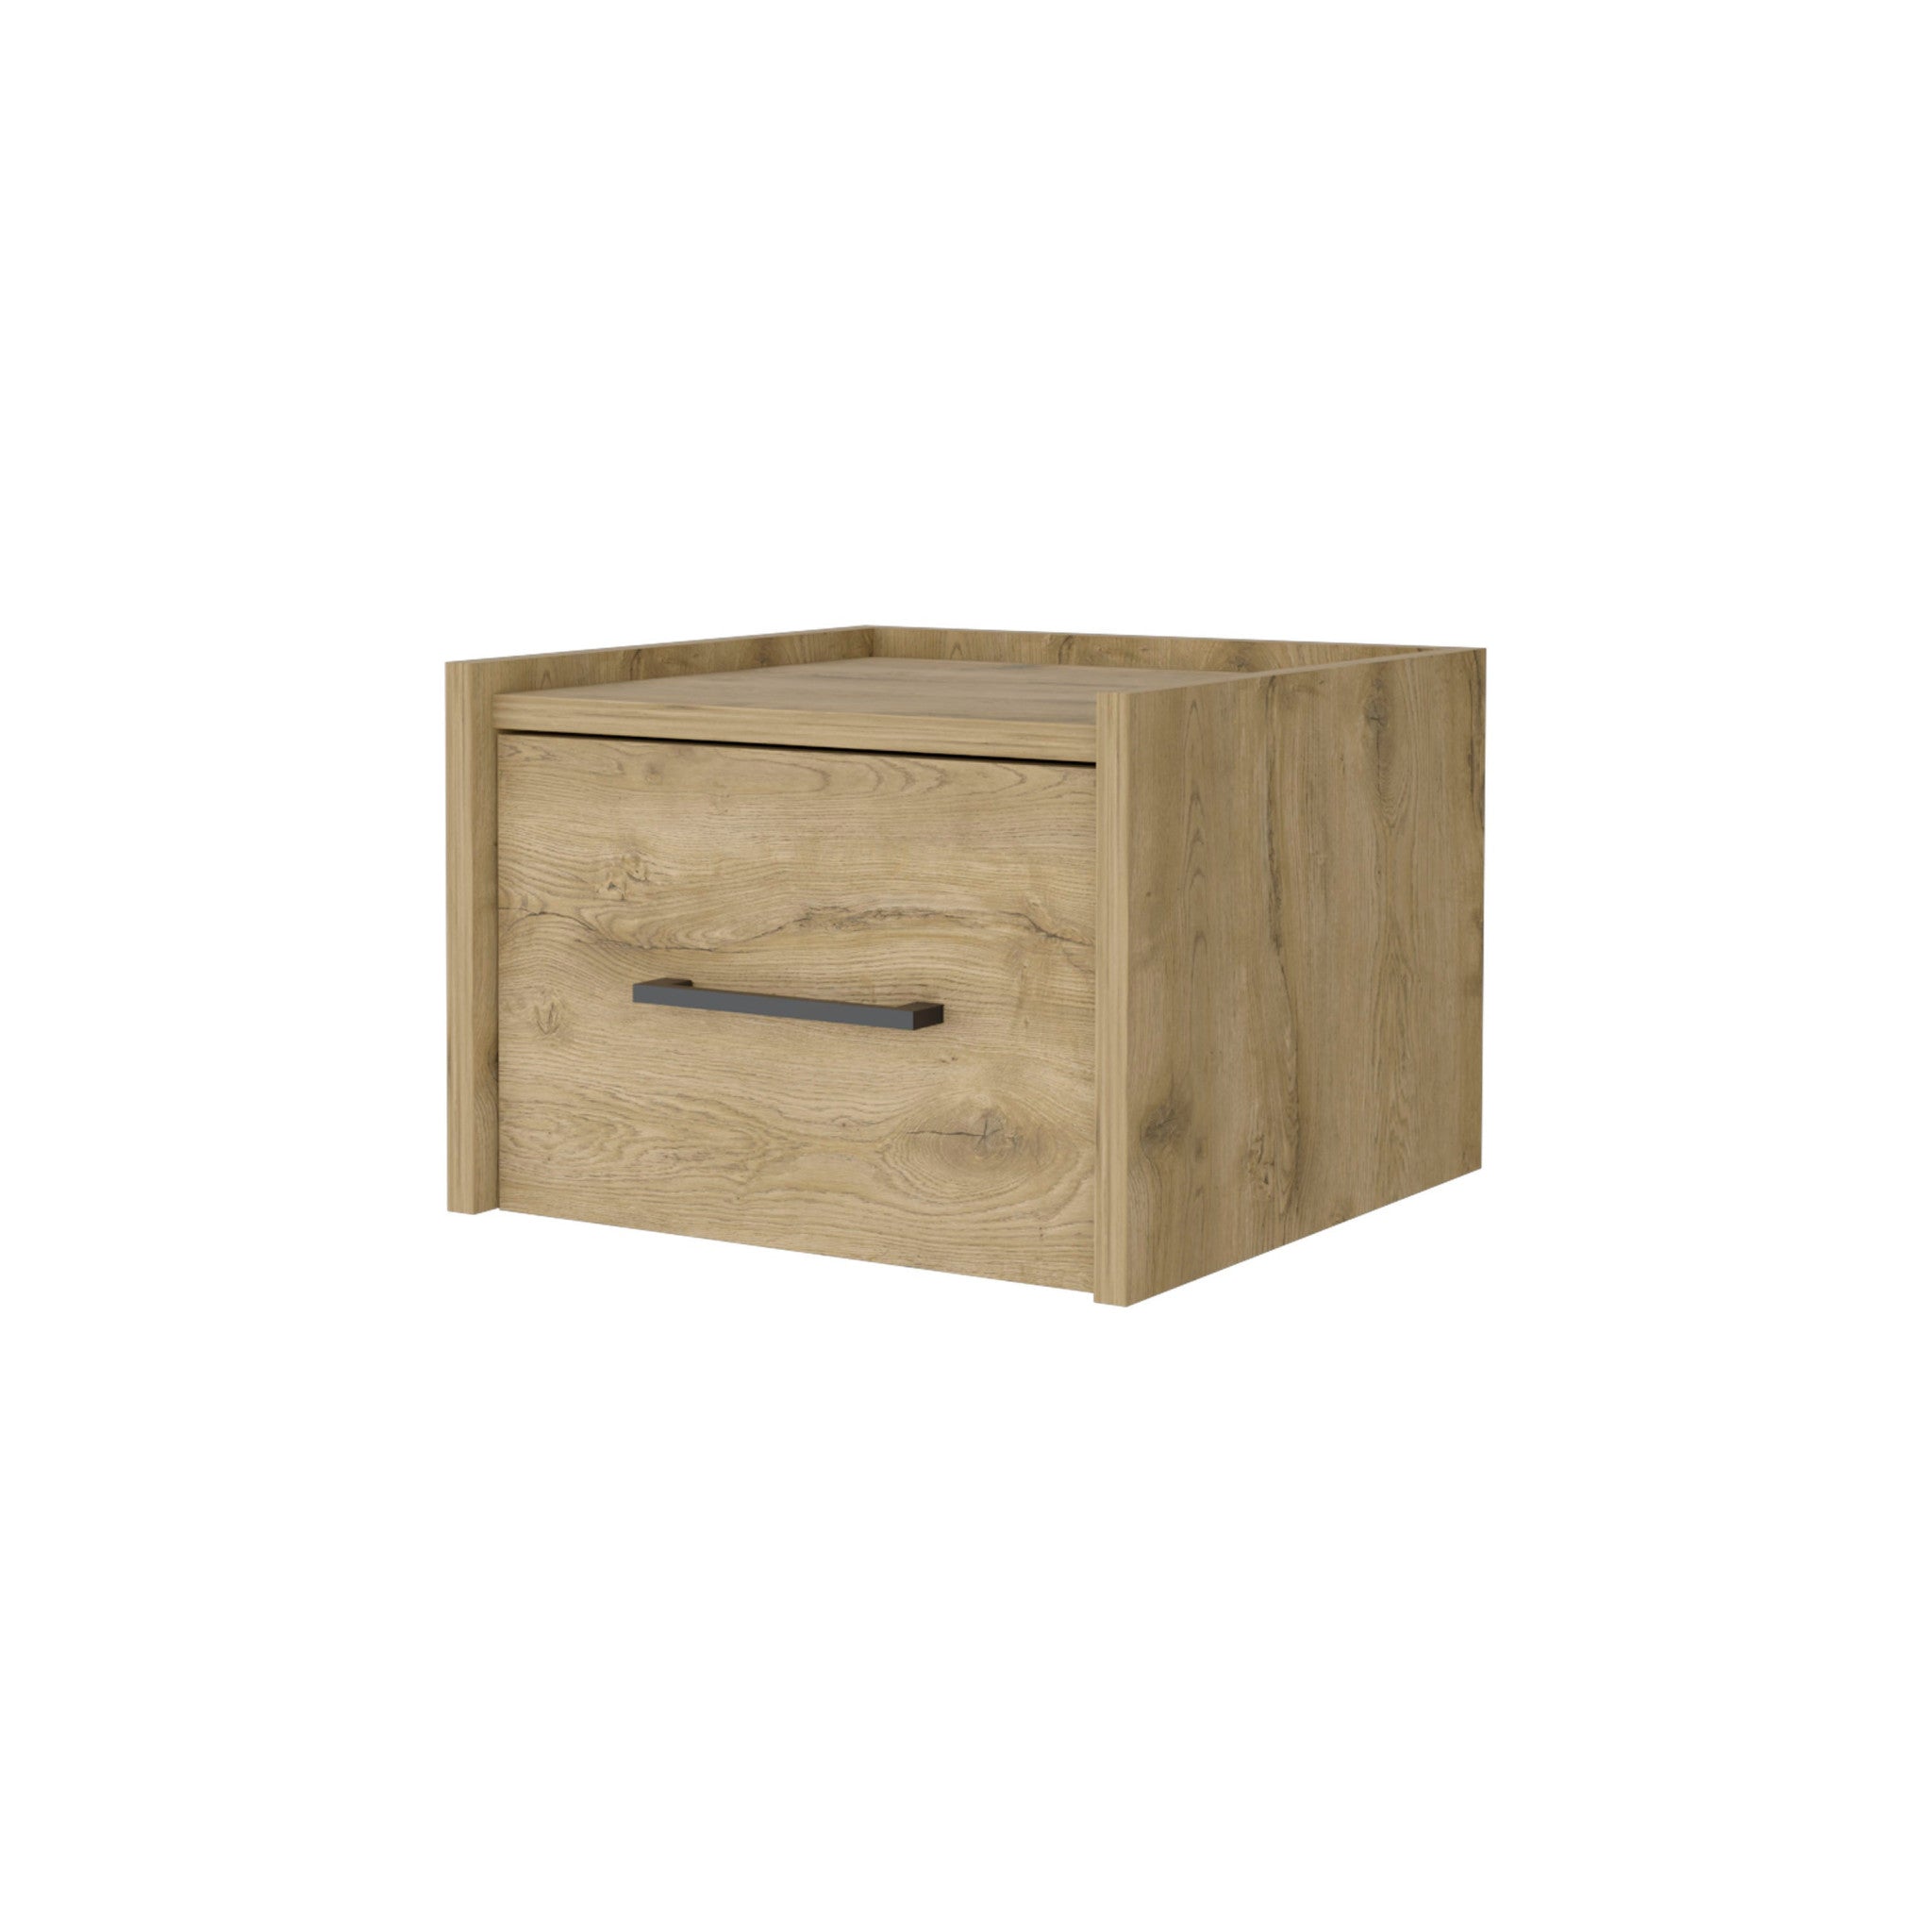 10" Beige One Drawer Faux Wood Floating Nightstand